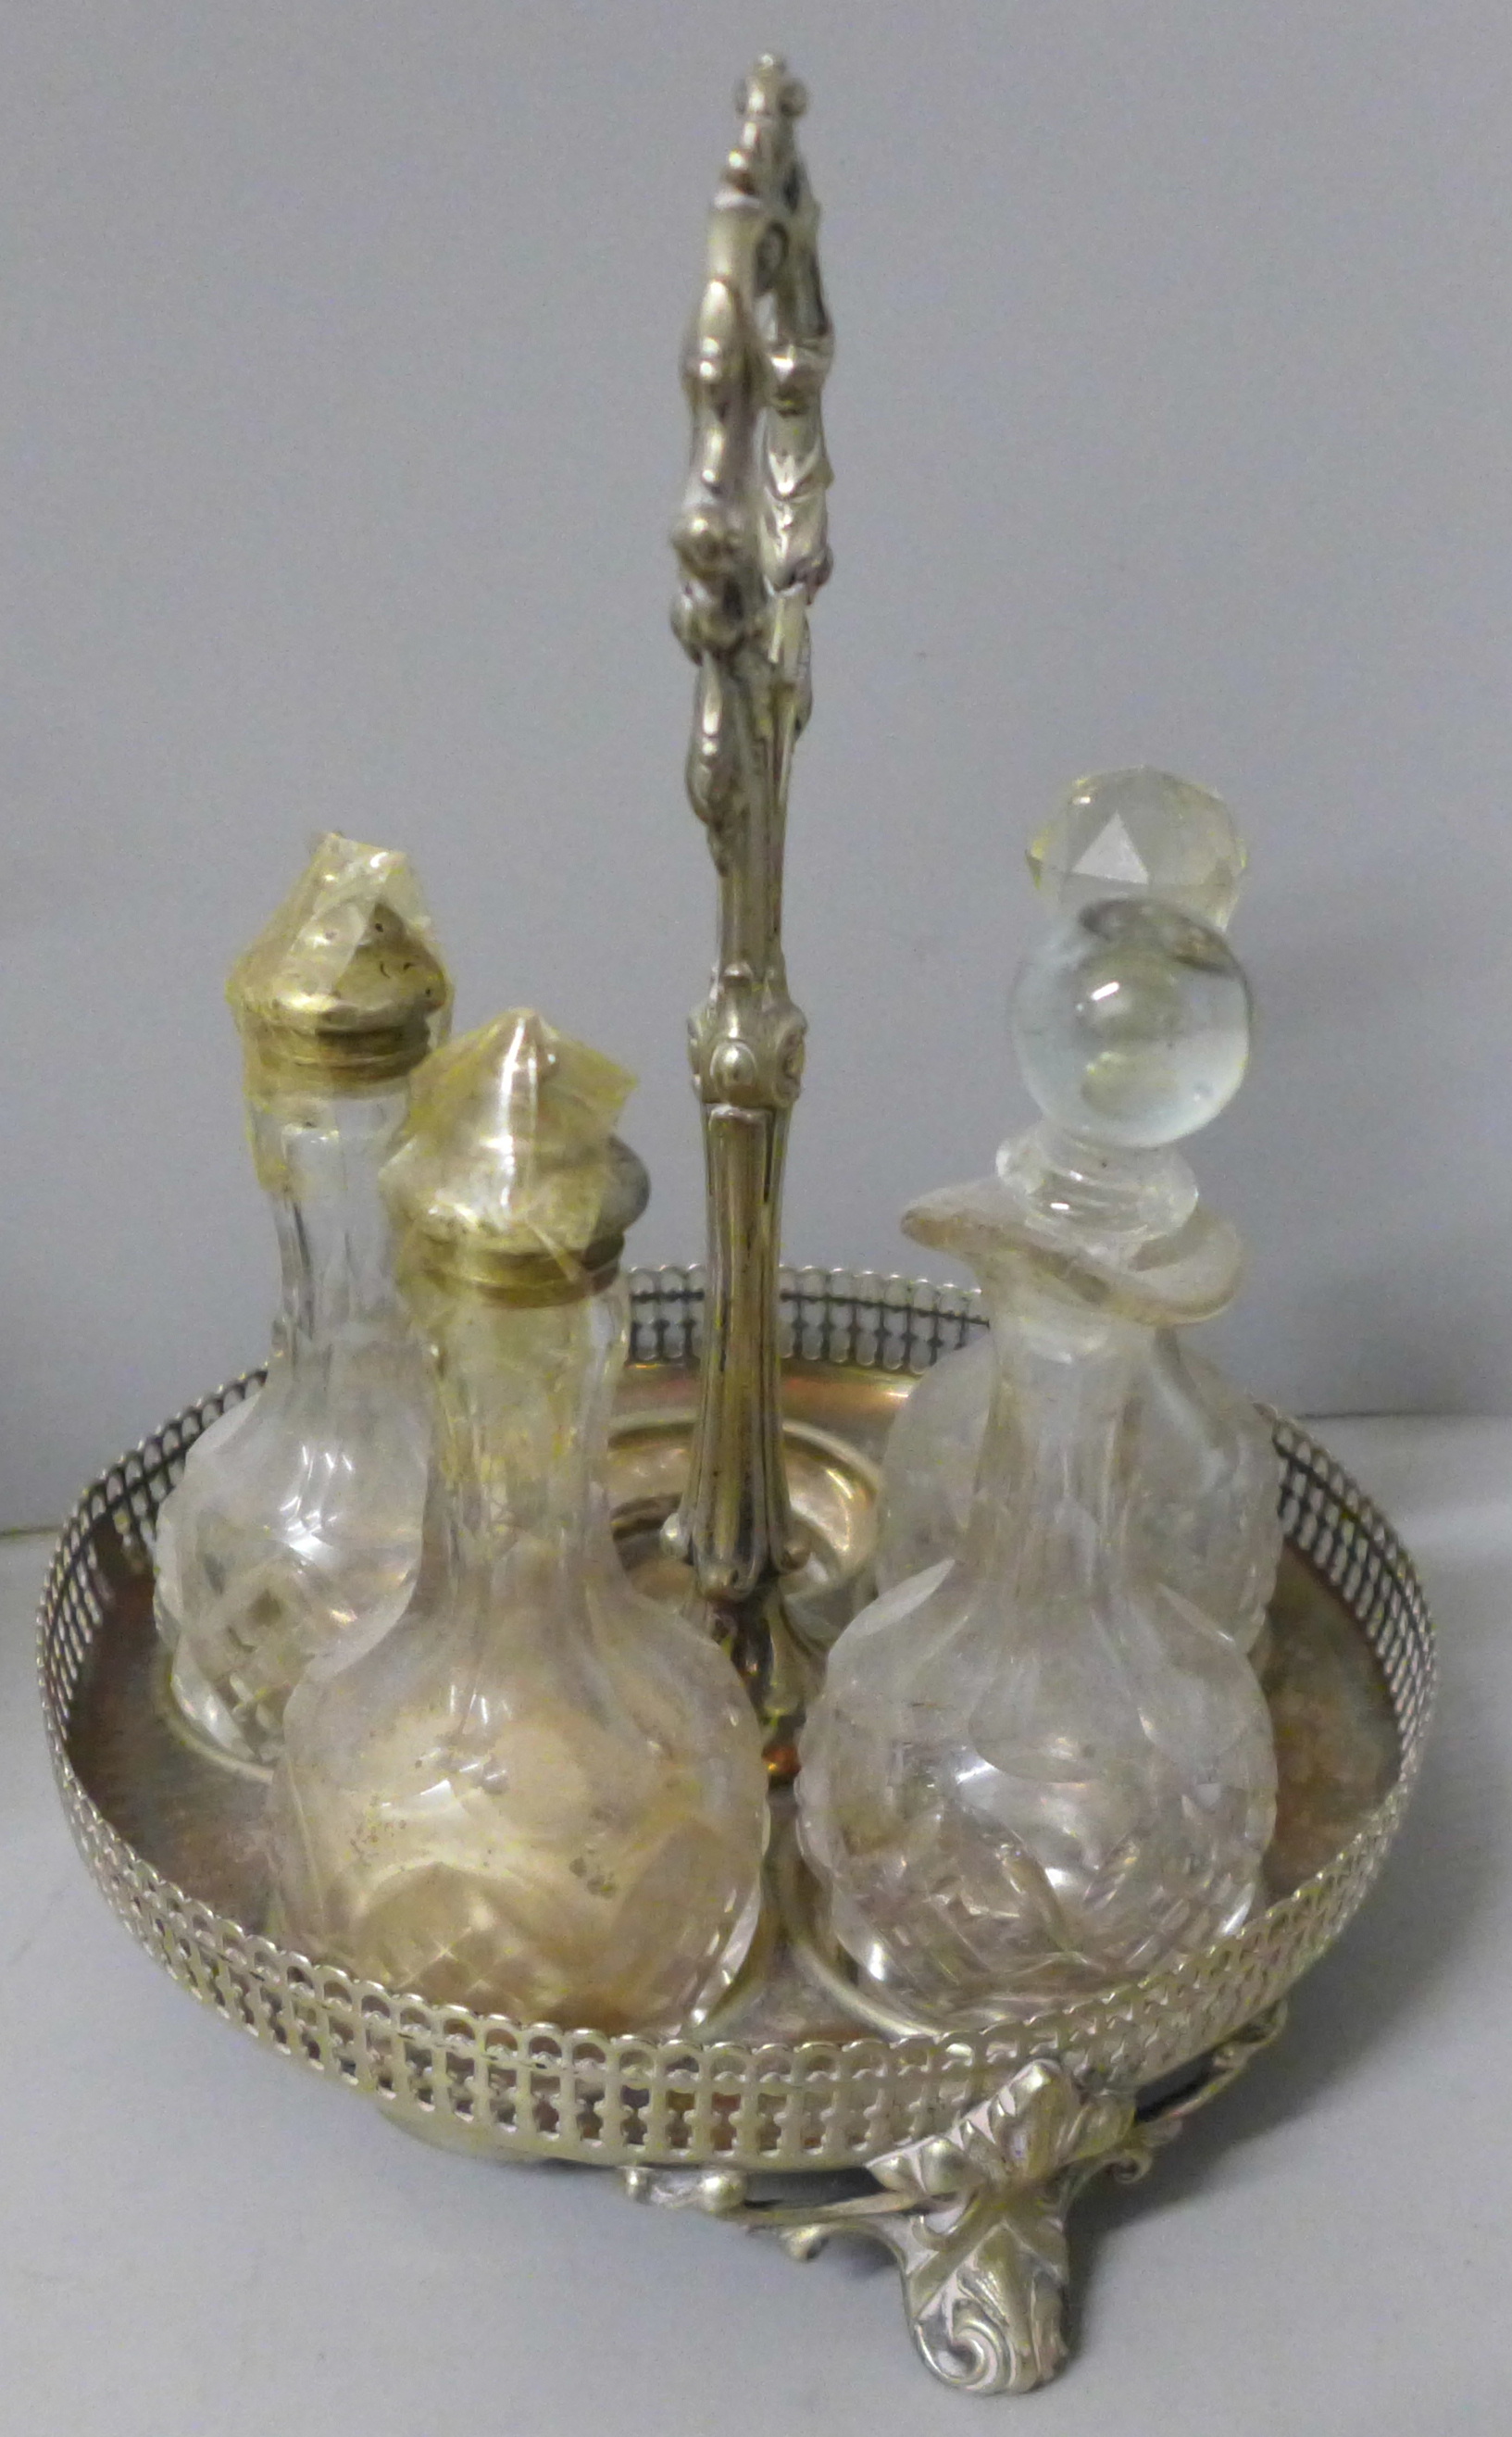 Two plated cruet sets, one six bottle with missing glass bottle and an ornate six bottle cruet set - Image 2 of 3